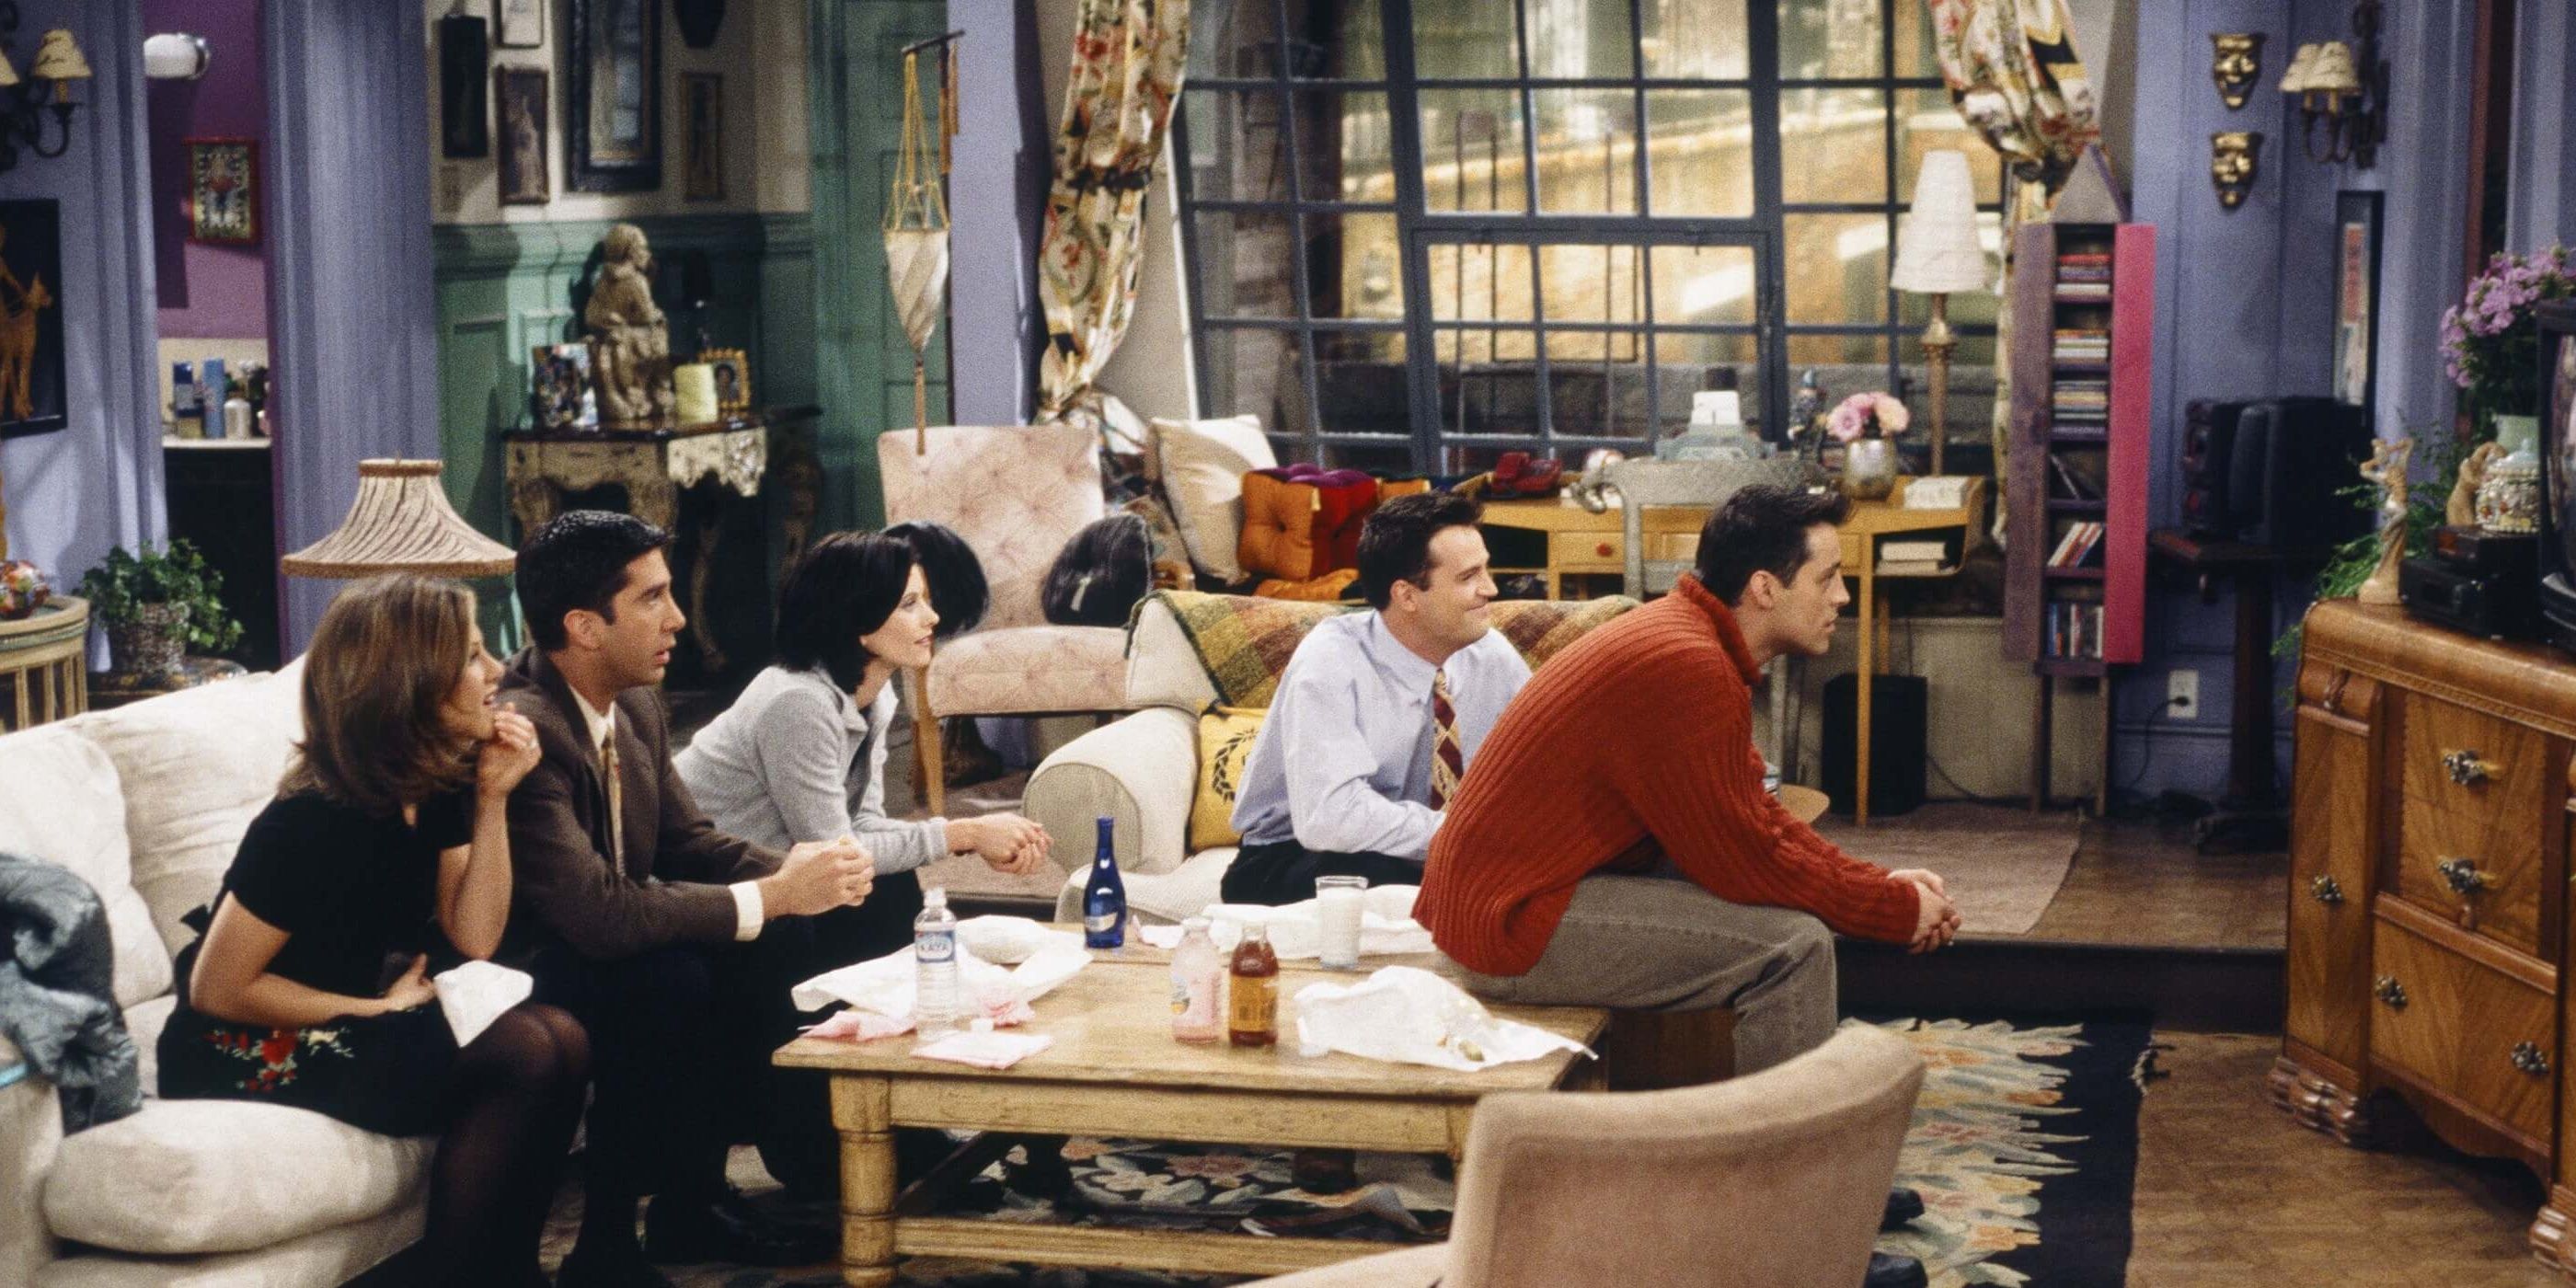 The Friends apartment building — Live the Movies